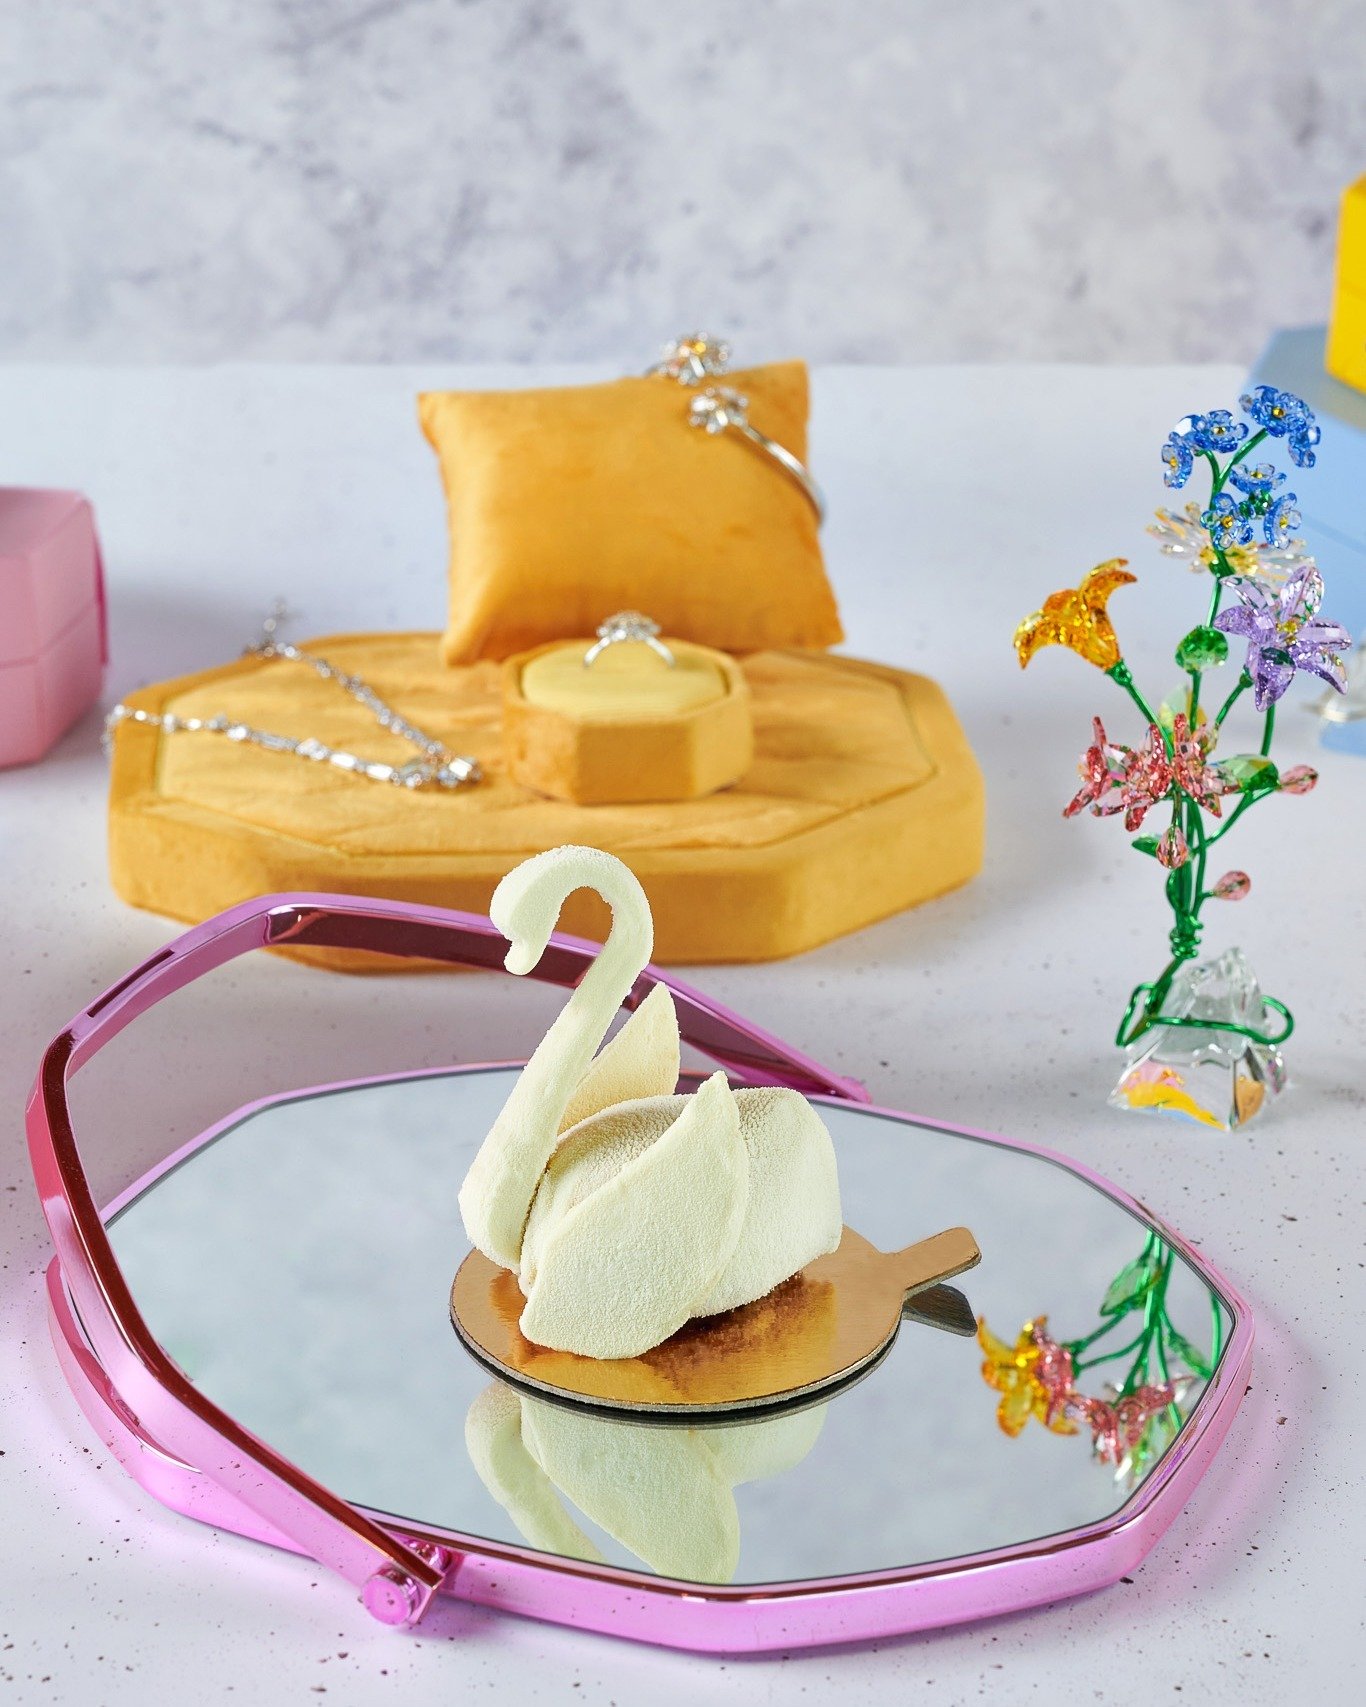 Graceful as a swan, strong as a mother. Celebrate Mother's Day with elegance and love at SKAI with our Swarovski High tea.
⁣⁣
Crafted by Executive Chef Seumas Smith and Executive Pastry Chef Yong Ming Choong, each dish is a reflection of Swarovski's 